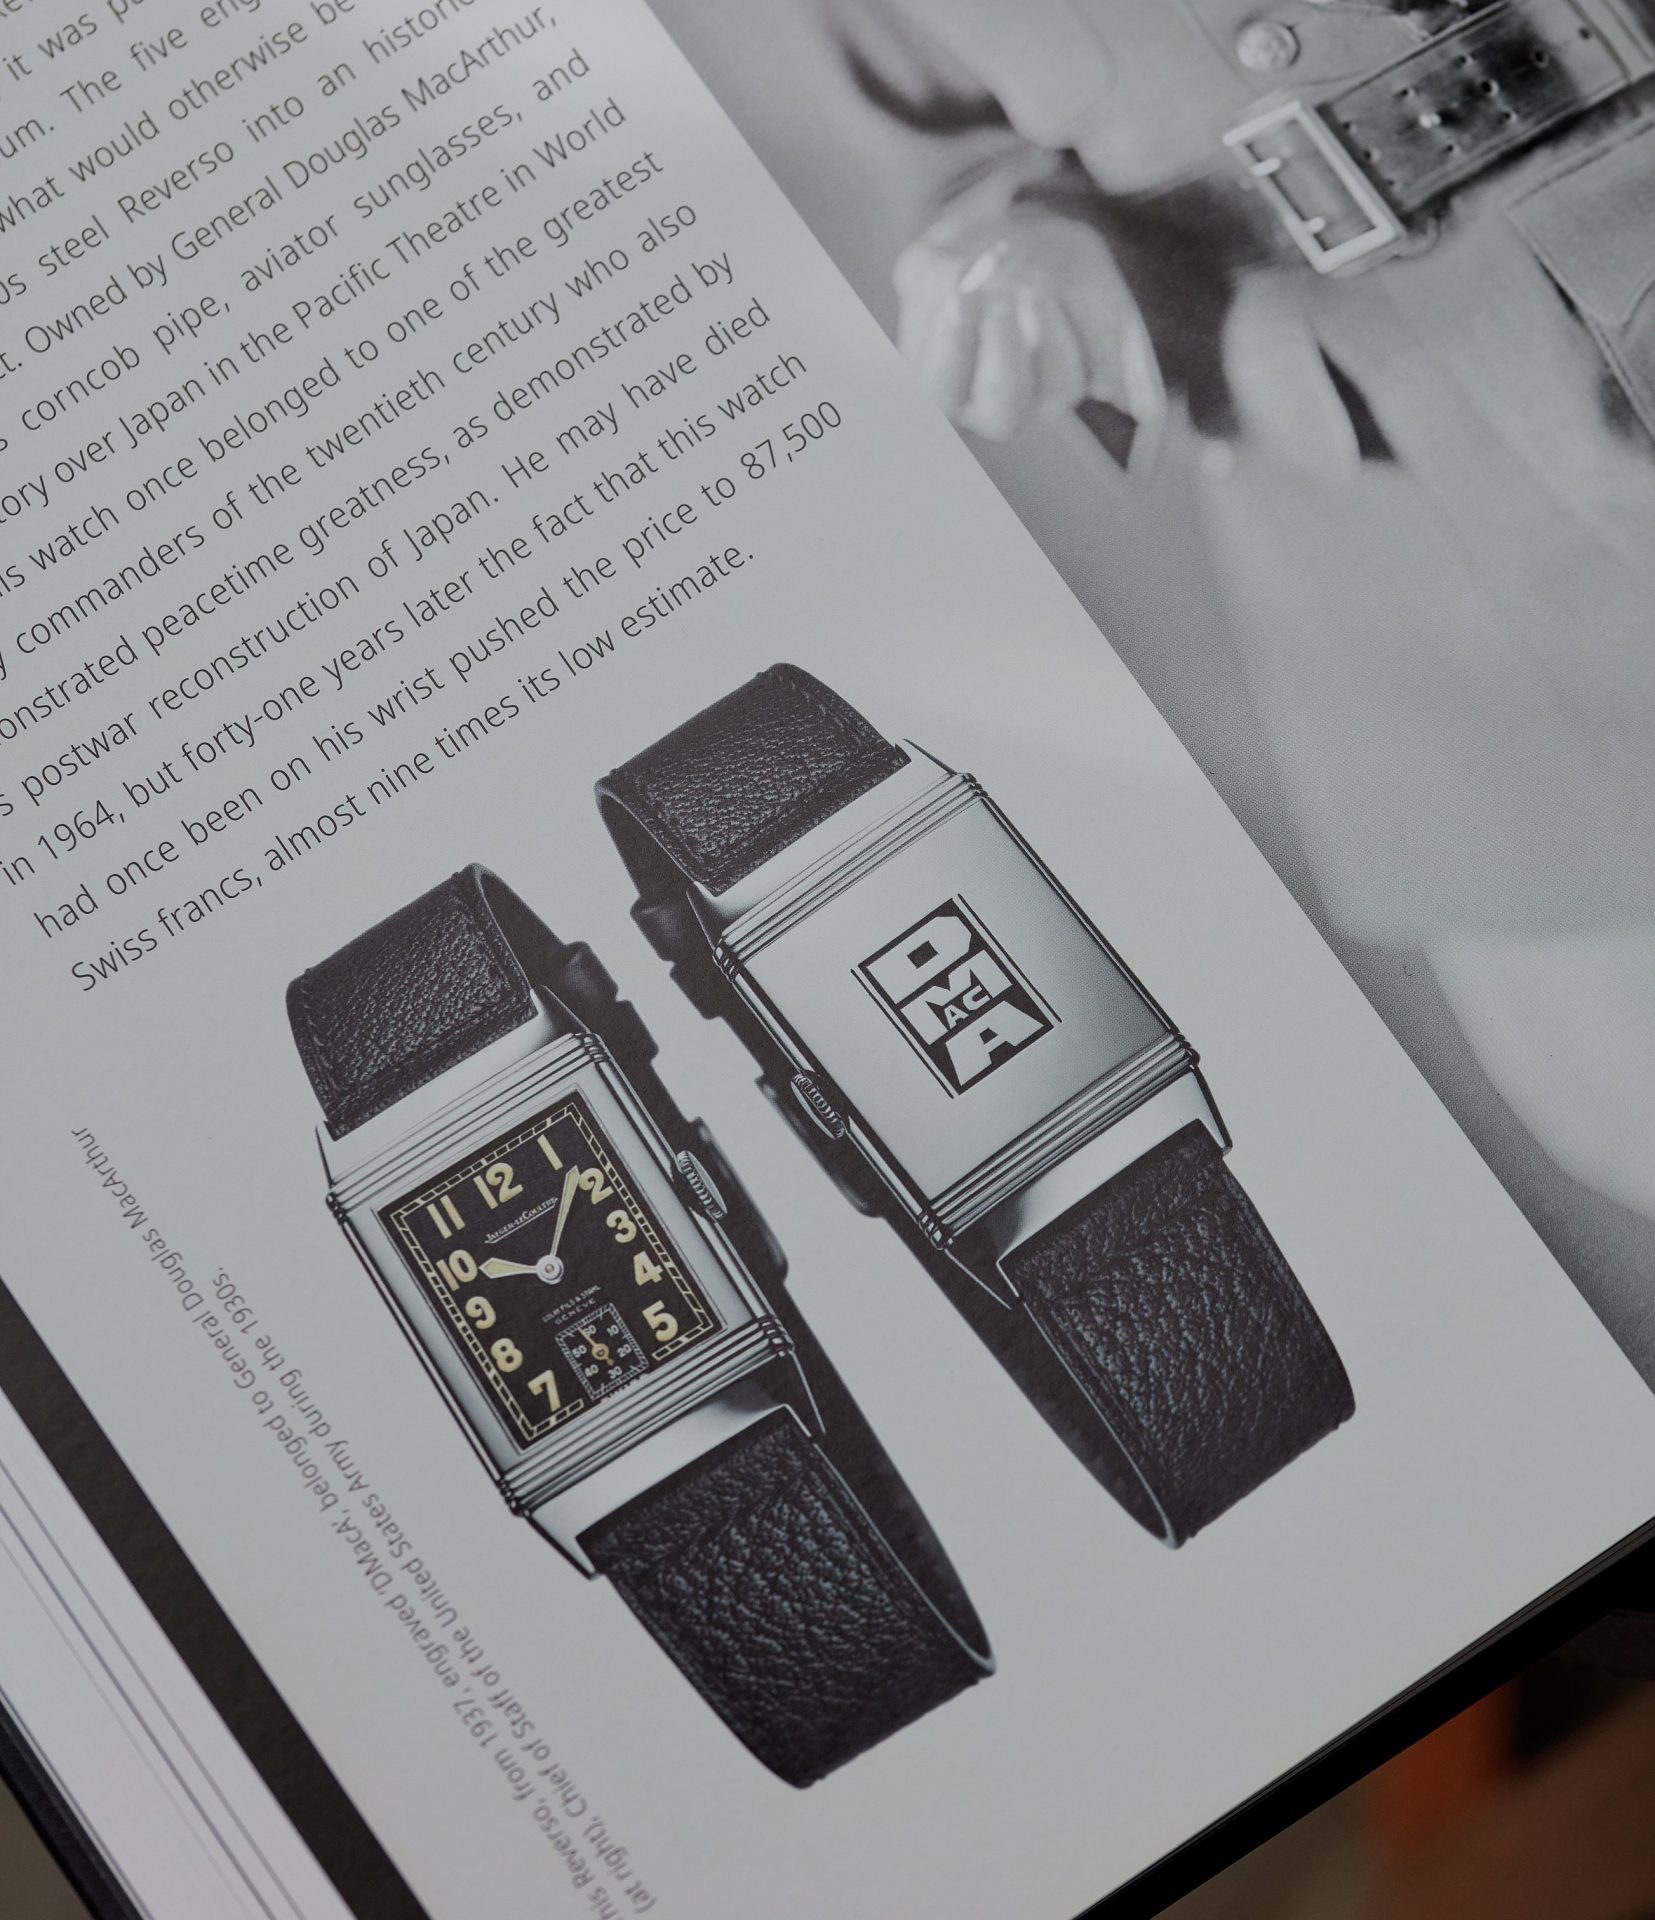 Caseback engravings and lacquer-work for General Douglas McArthur to commemorate historic flight by Amelia Earhart  in The Flippin’ History of the Reverso for A Collected Man